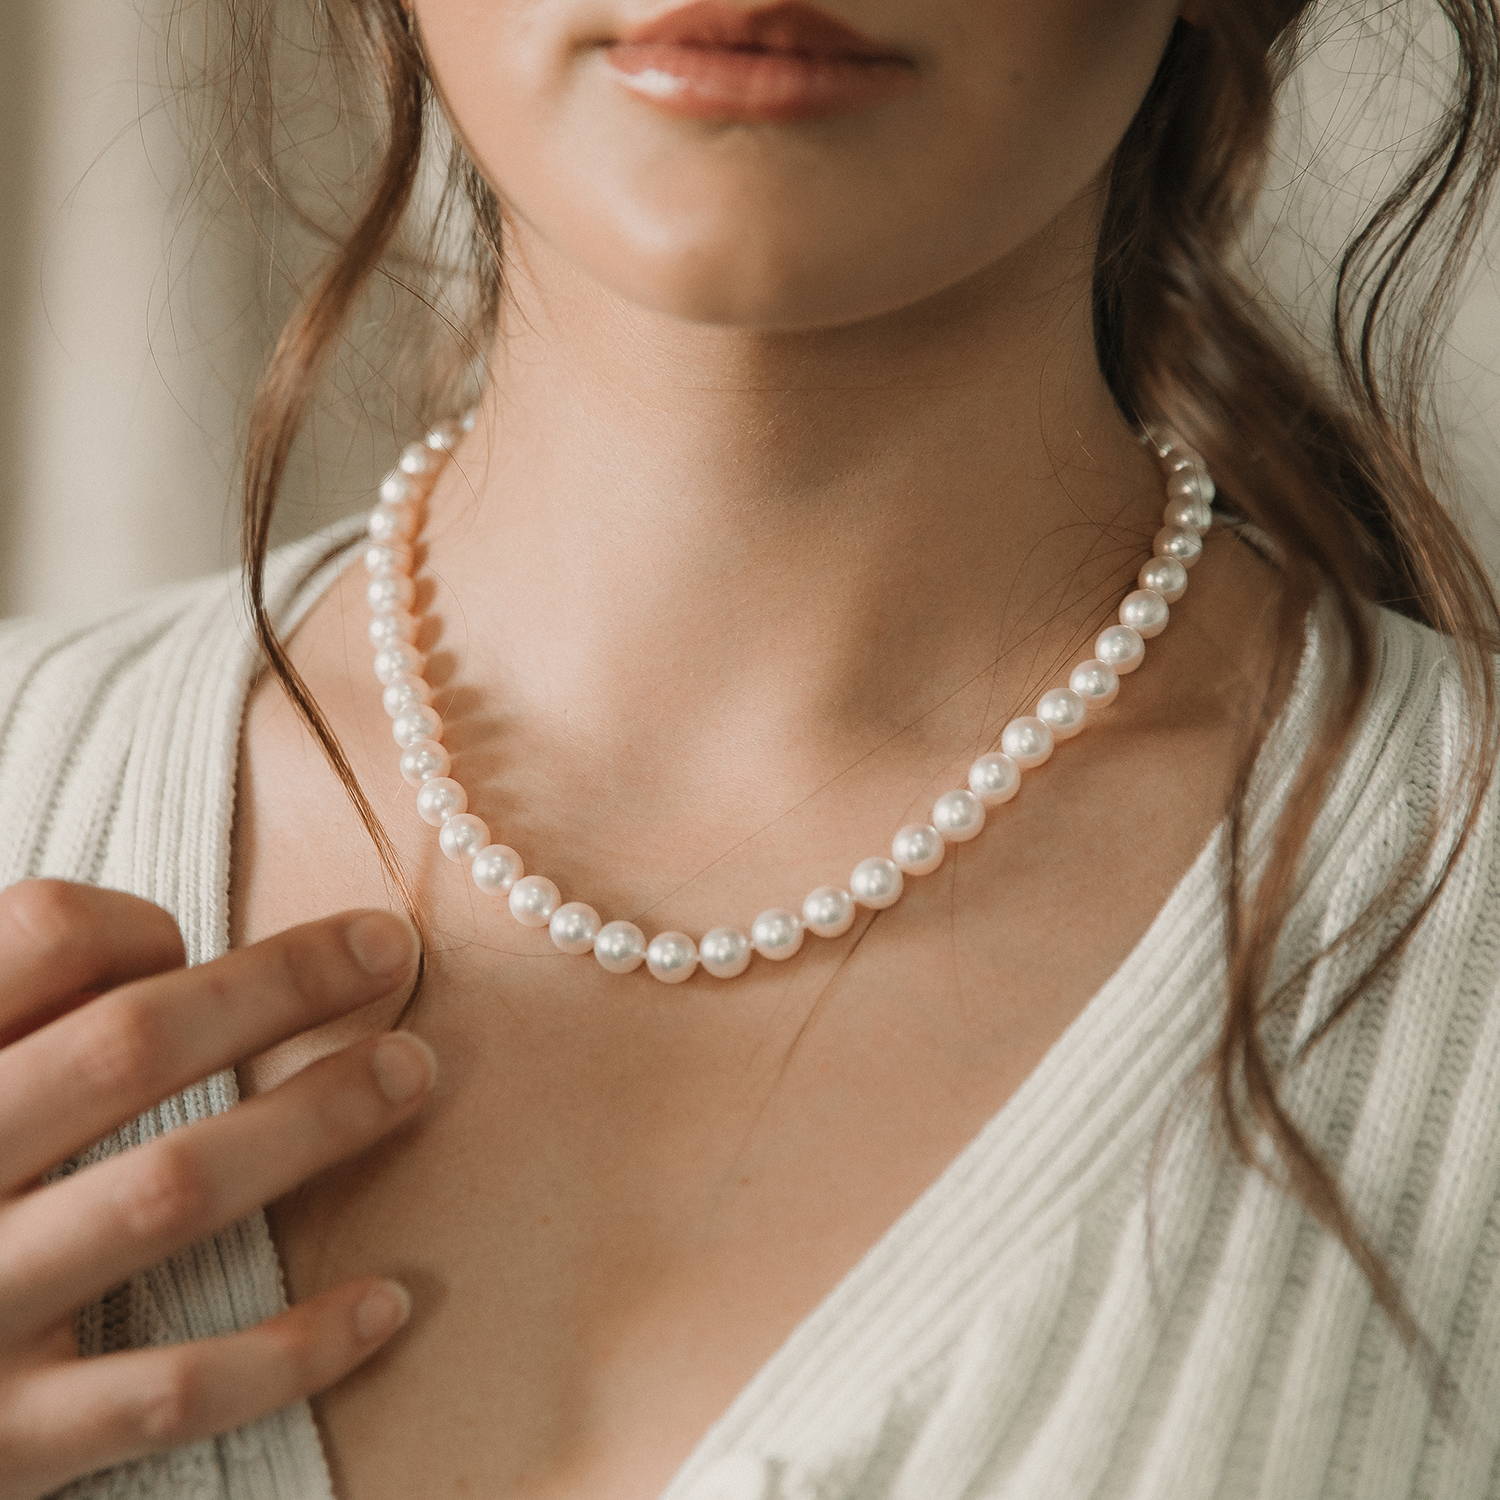 Best Classic Pearl Necklaces